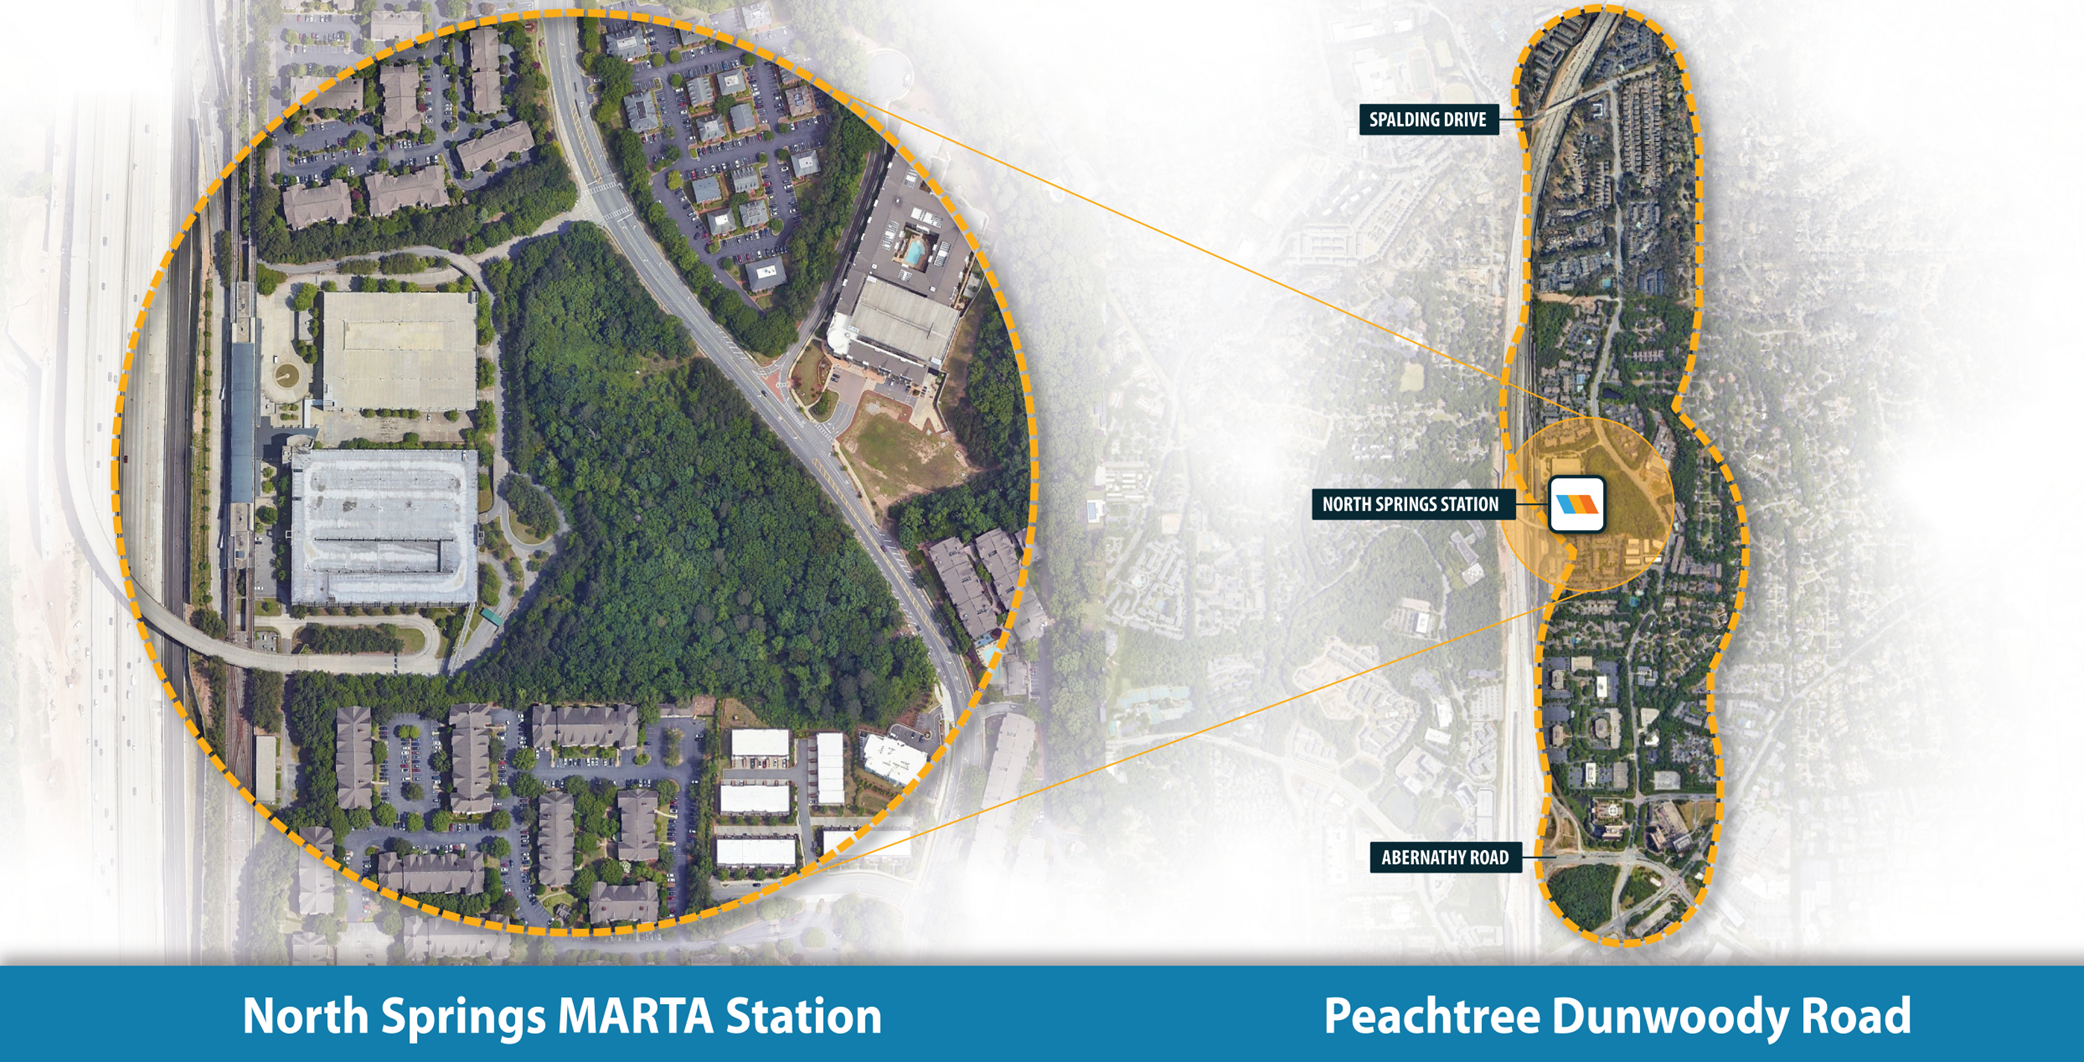 A map showing the North Springs MARTA Station area and Peachtree Dunwoody Road from Abernathy Road to Spalding Drive